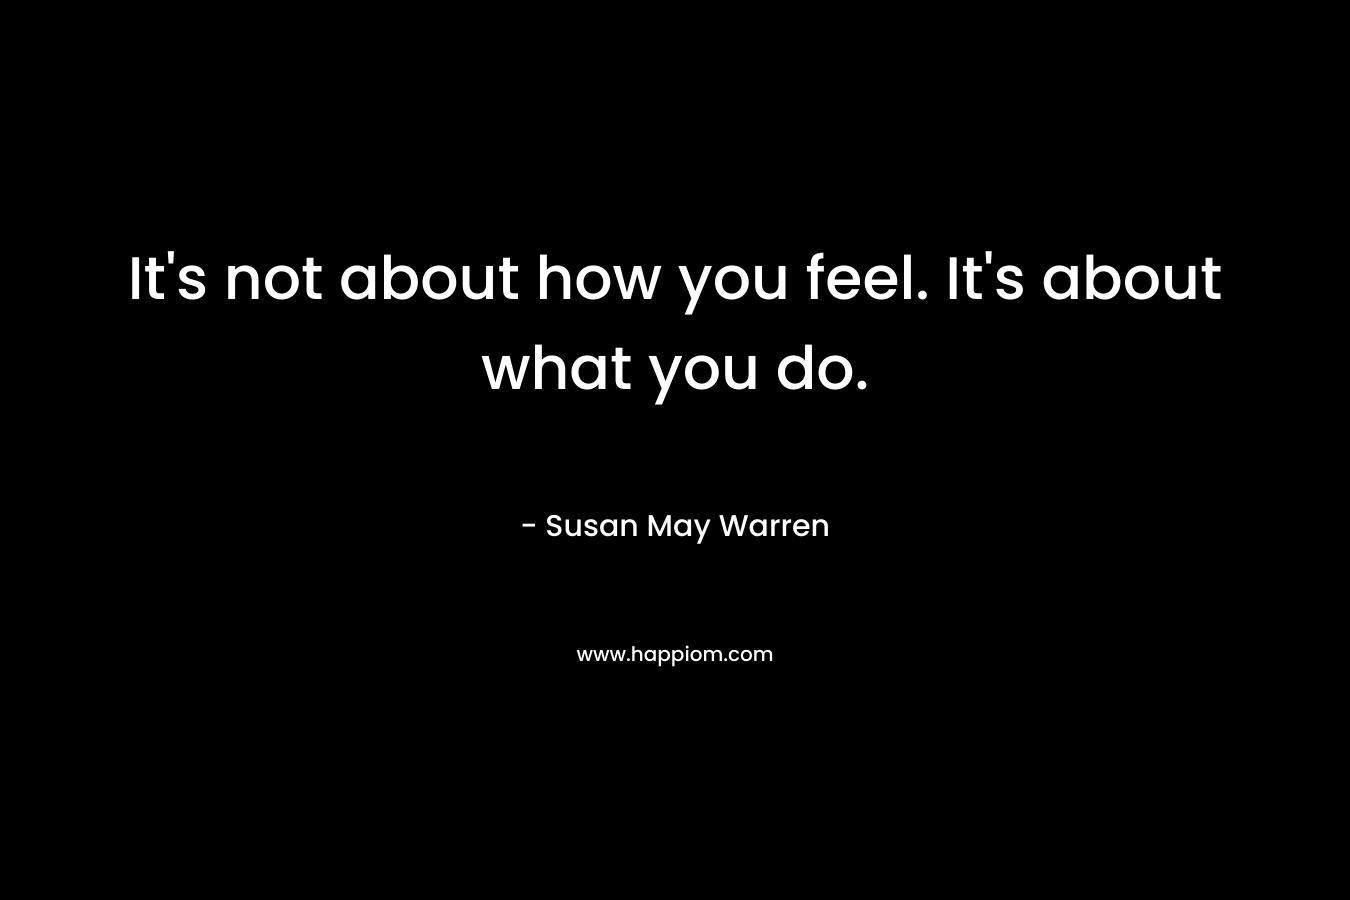 It’s not about how you feel. It’s about what you do. – Susan May Warren